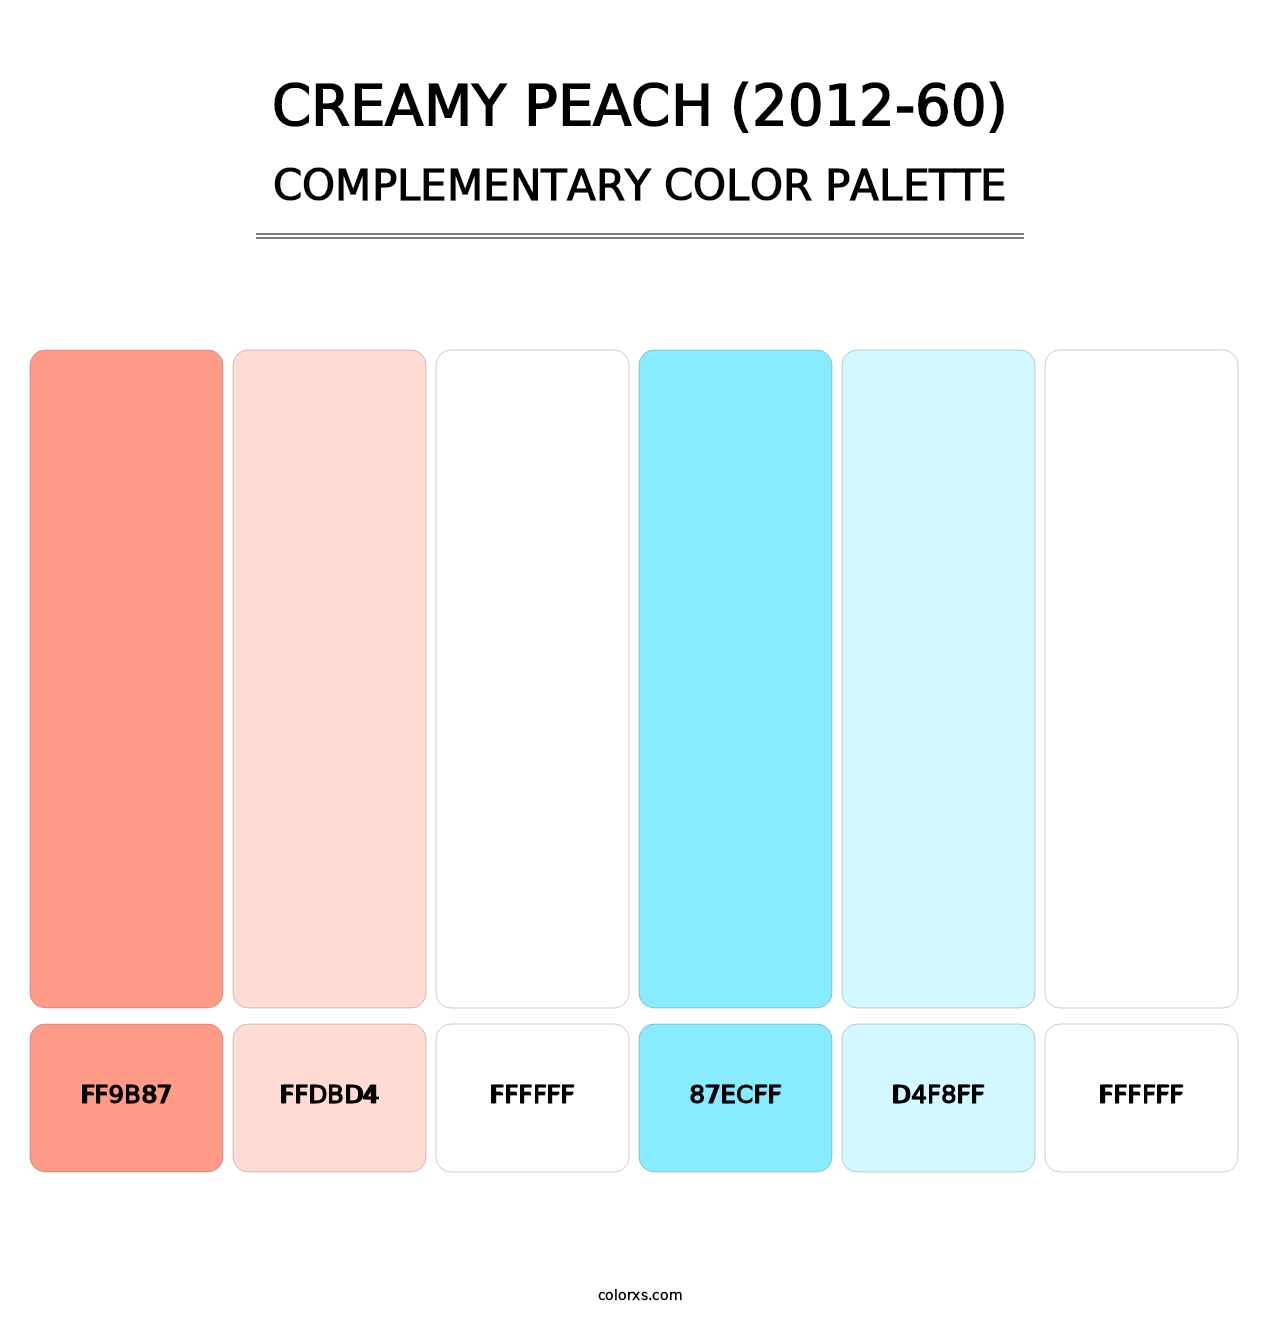 Creamy Peach (2012-60) - Complementary Color Palette